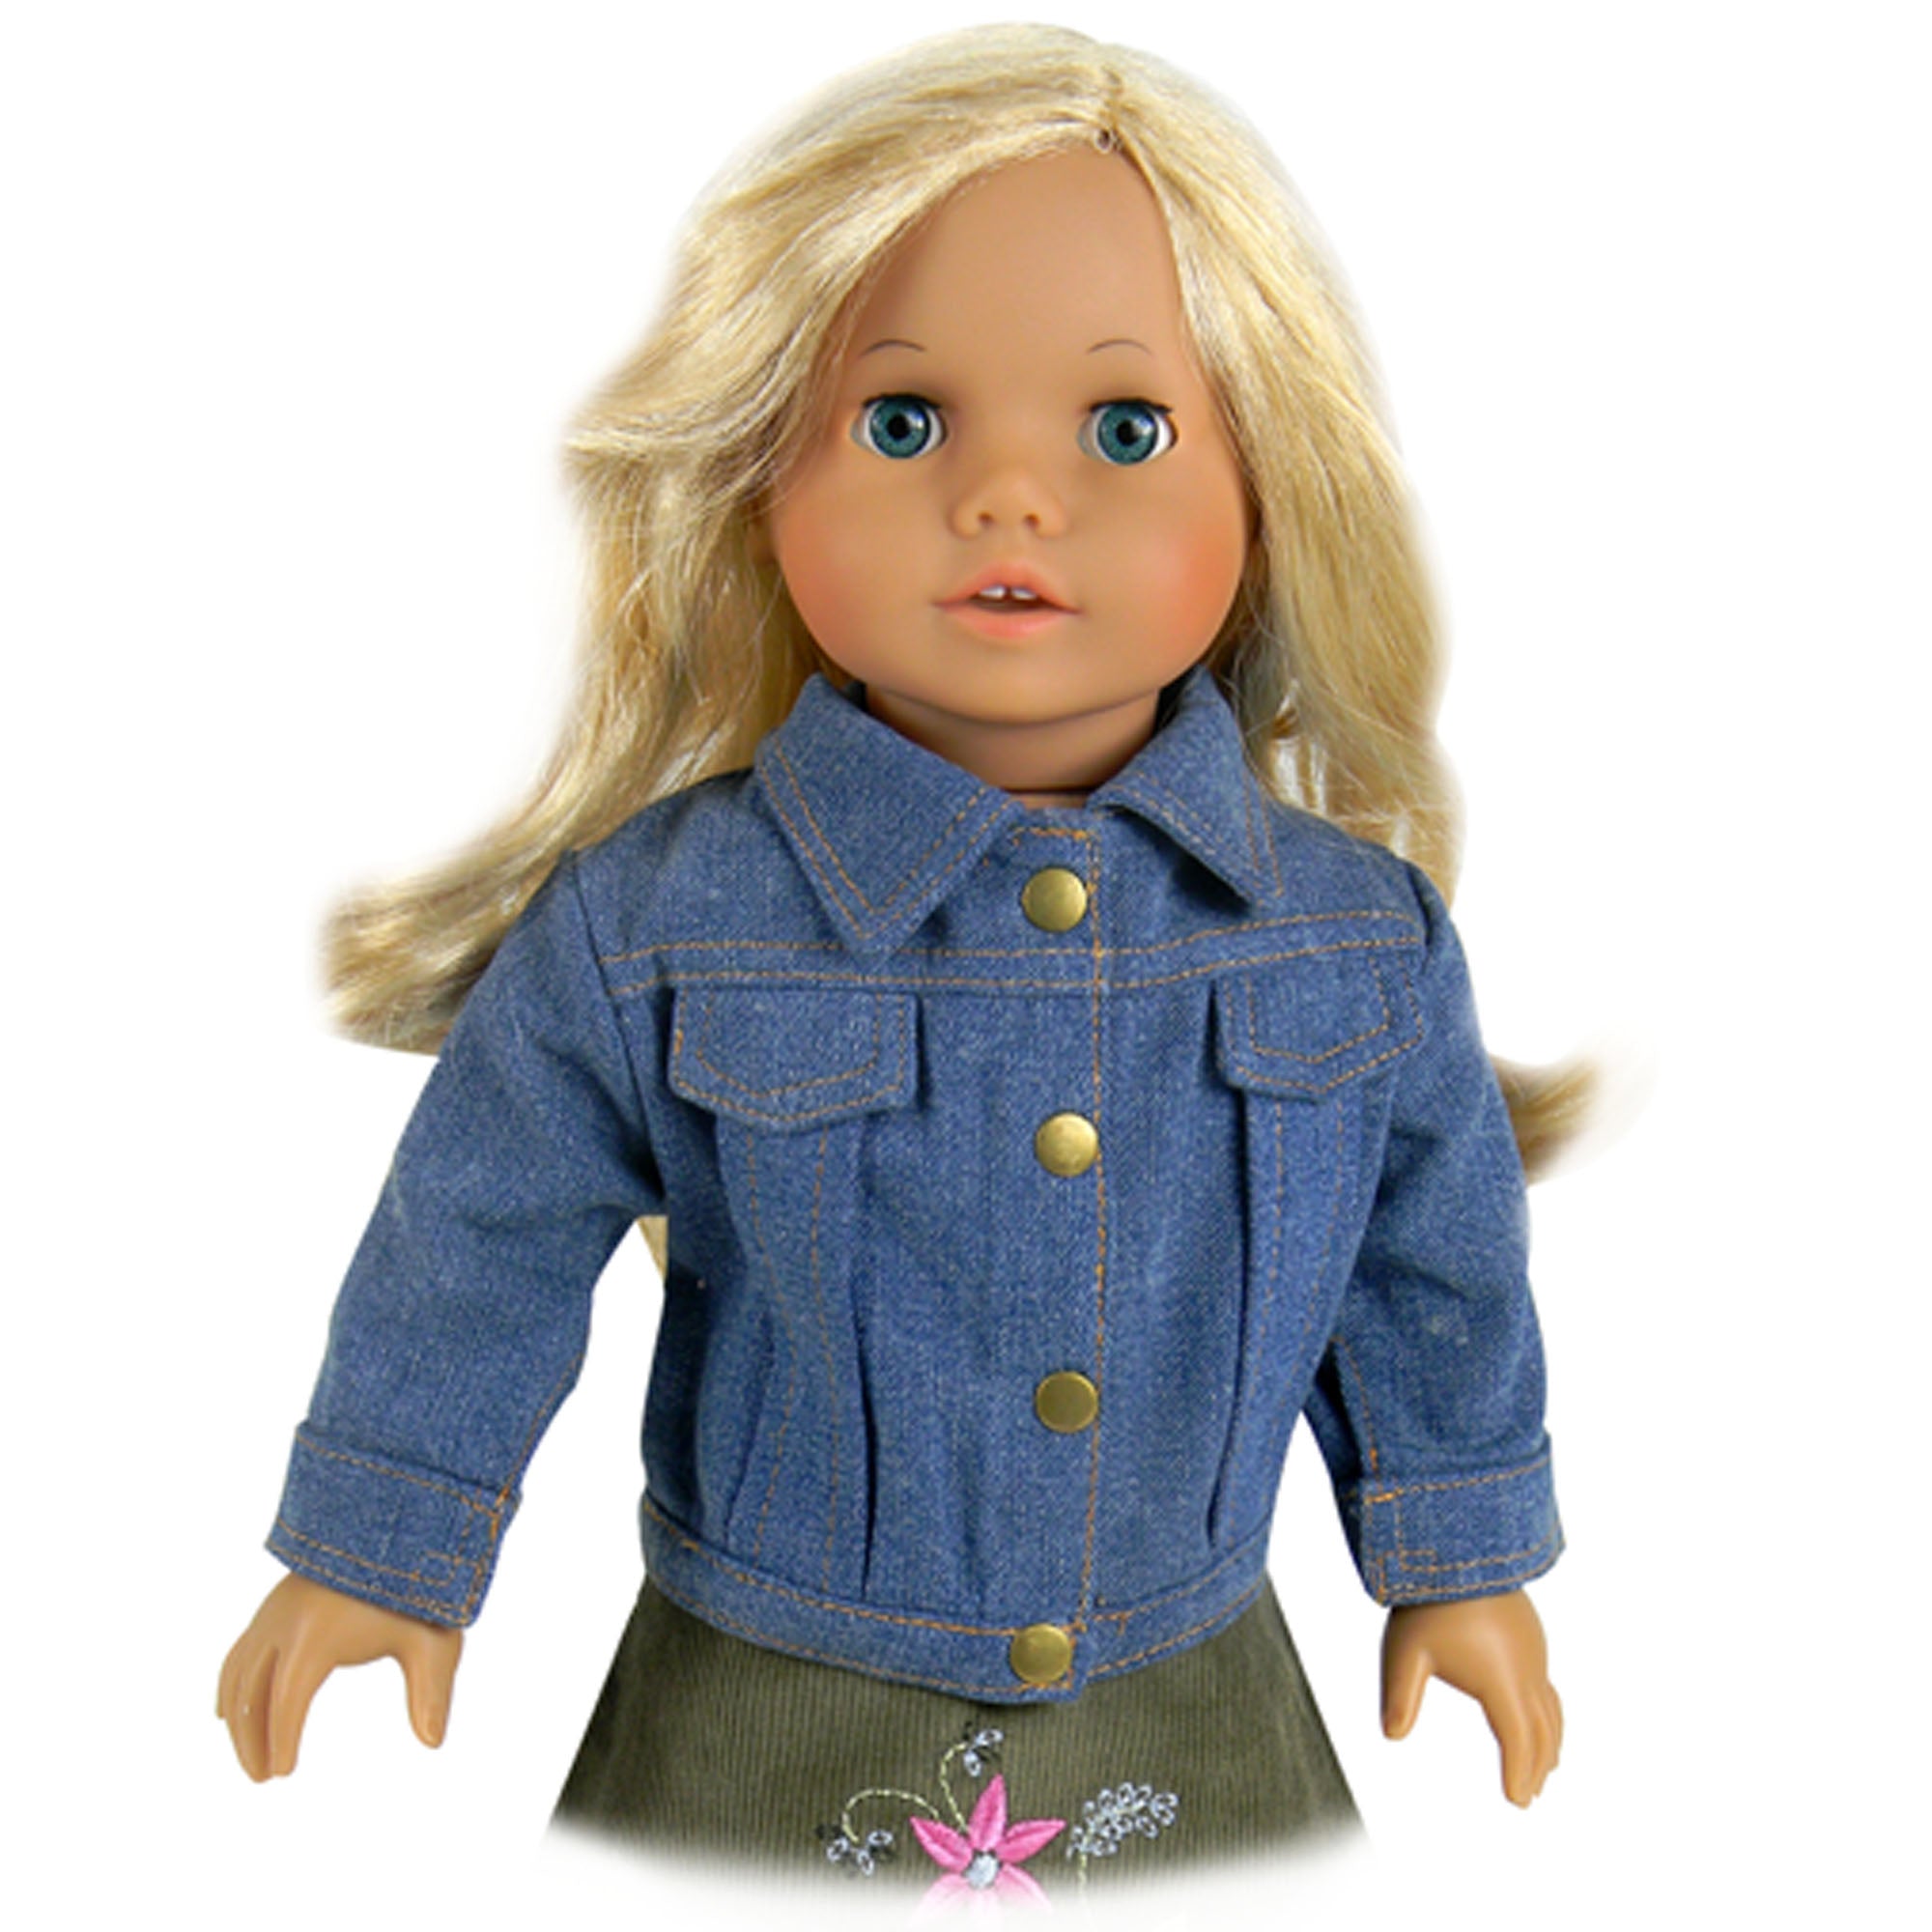 Sophia’s Gender-Neutral Mix & Match Denim Jean Jacket with Exposed Gold Stitching & Metallic Gold Buttons for 18” Dolls, Indigo Blue